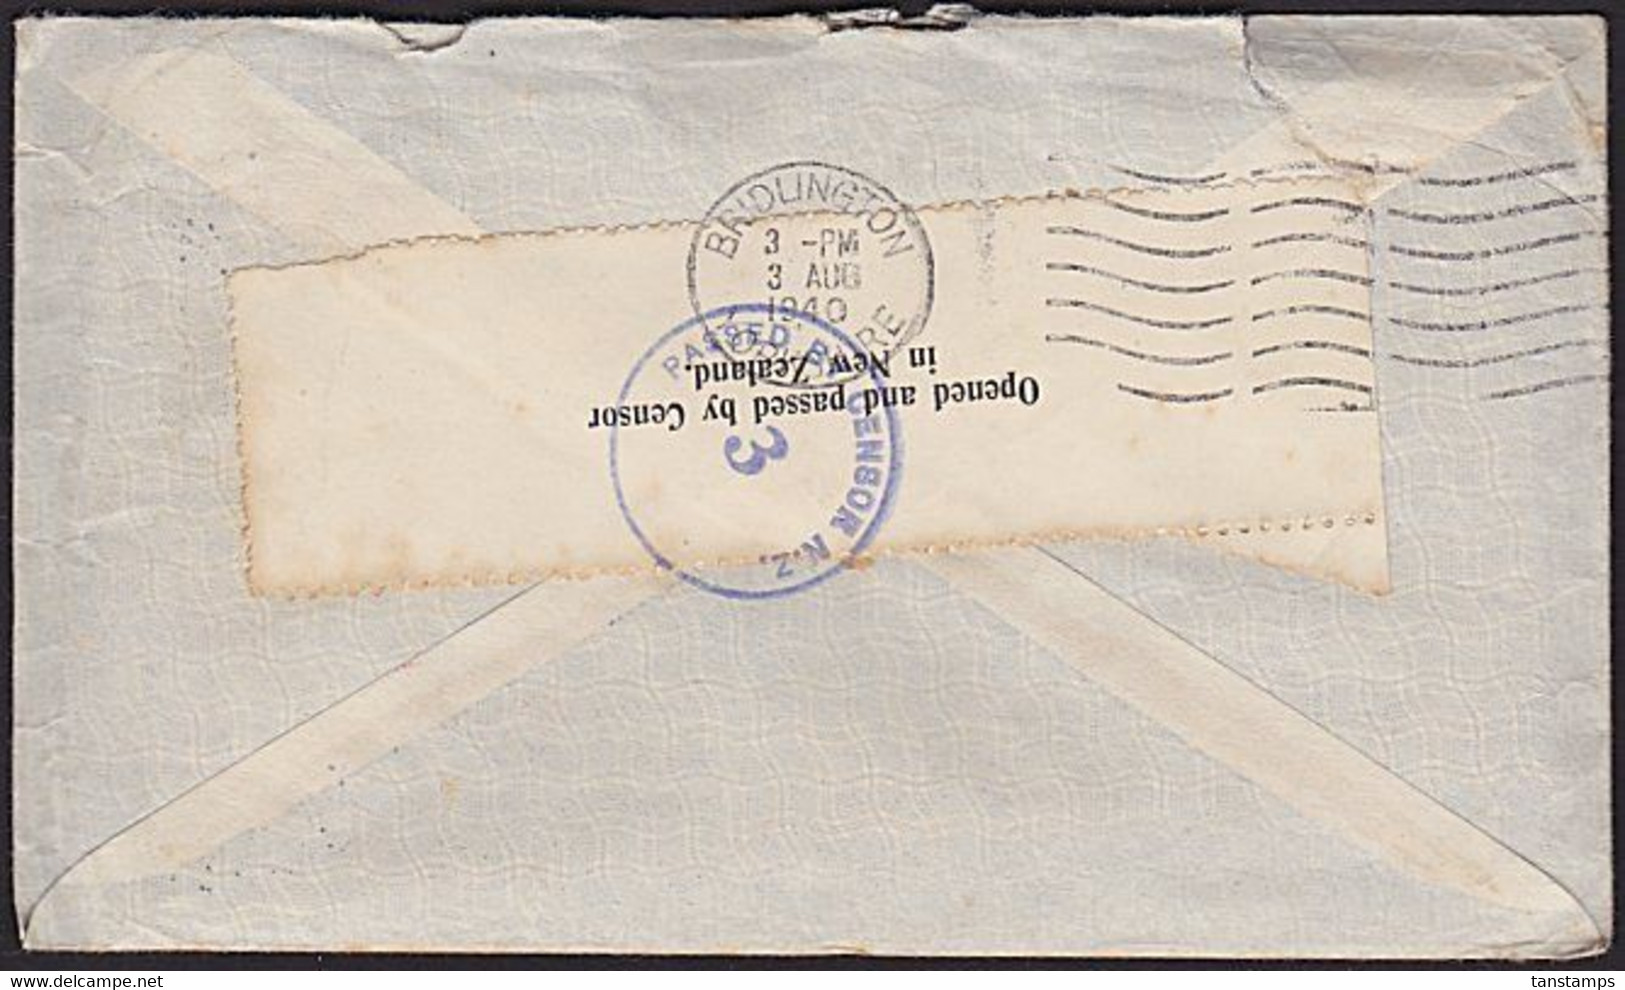 NEW ZEALAND - ENGLAND WWII 6/3 AIRMAIL RATE USING 6s ARMS REVENUE PASSED BY CENSOR 3 FIRST FLIGHT COVER - Briefe U. Dokumente